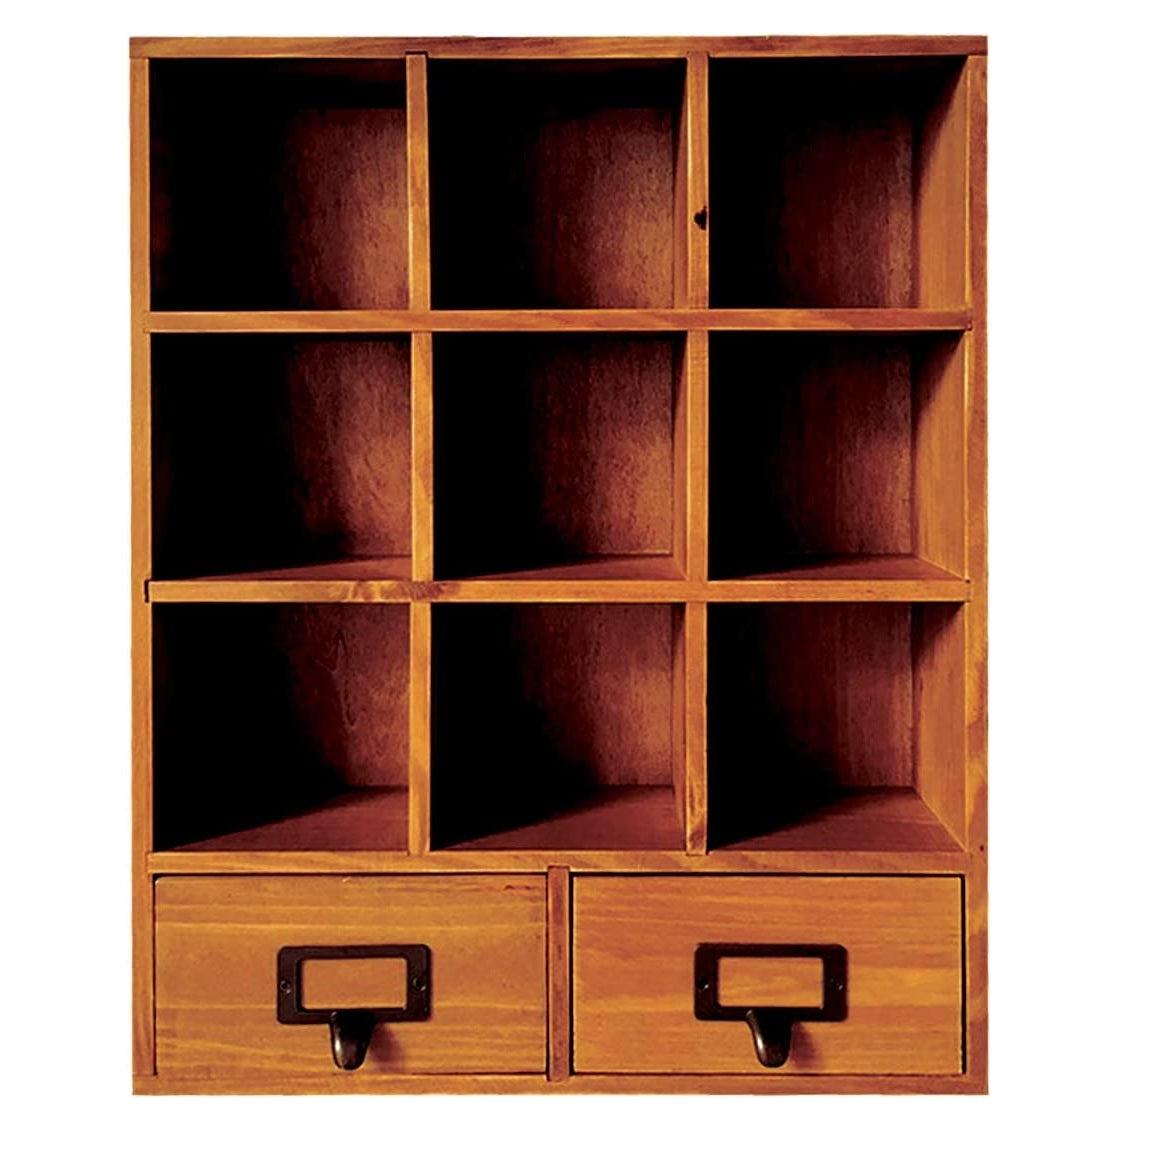 Wooden Storage Shelves, For For File Display